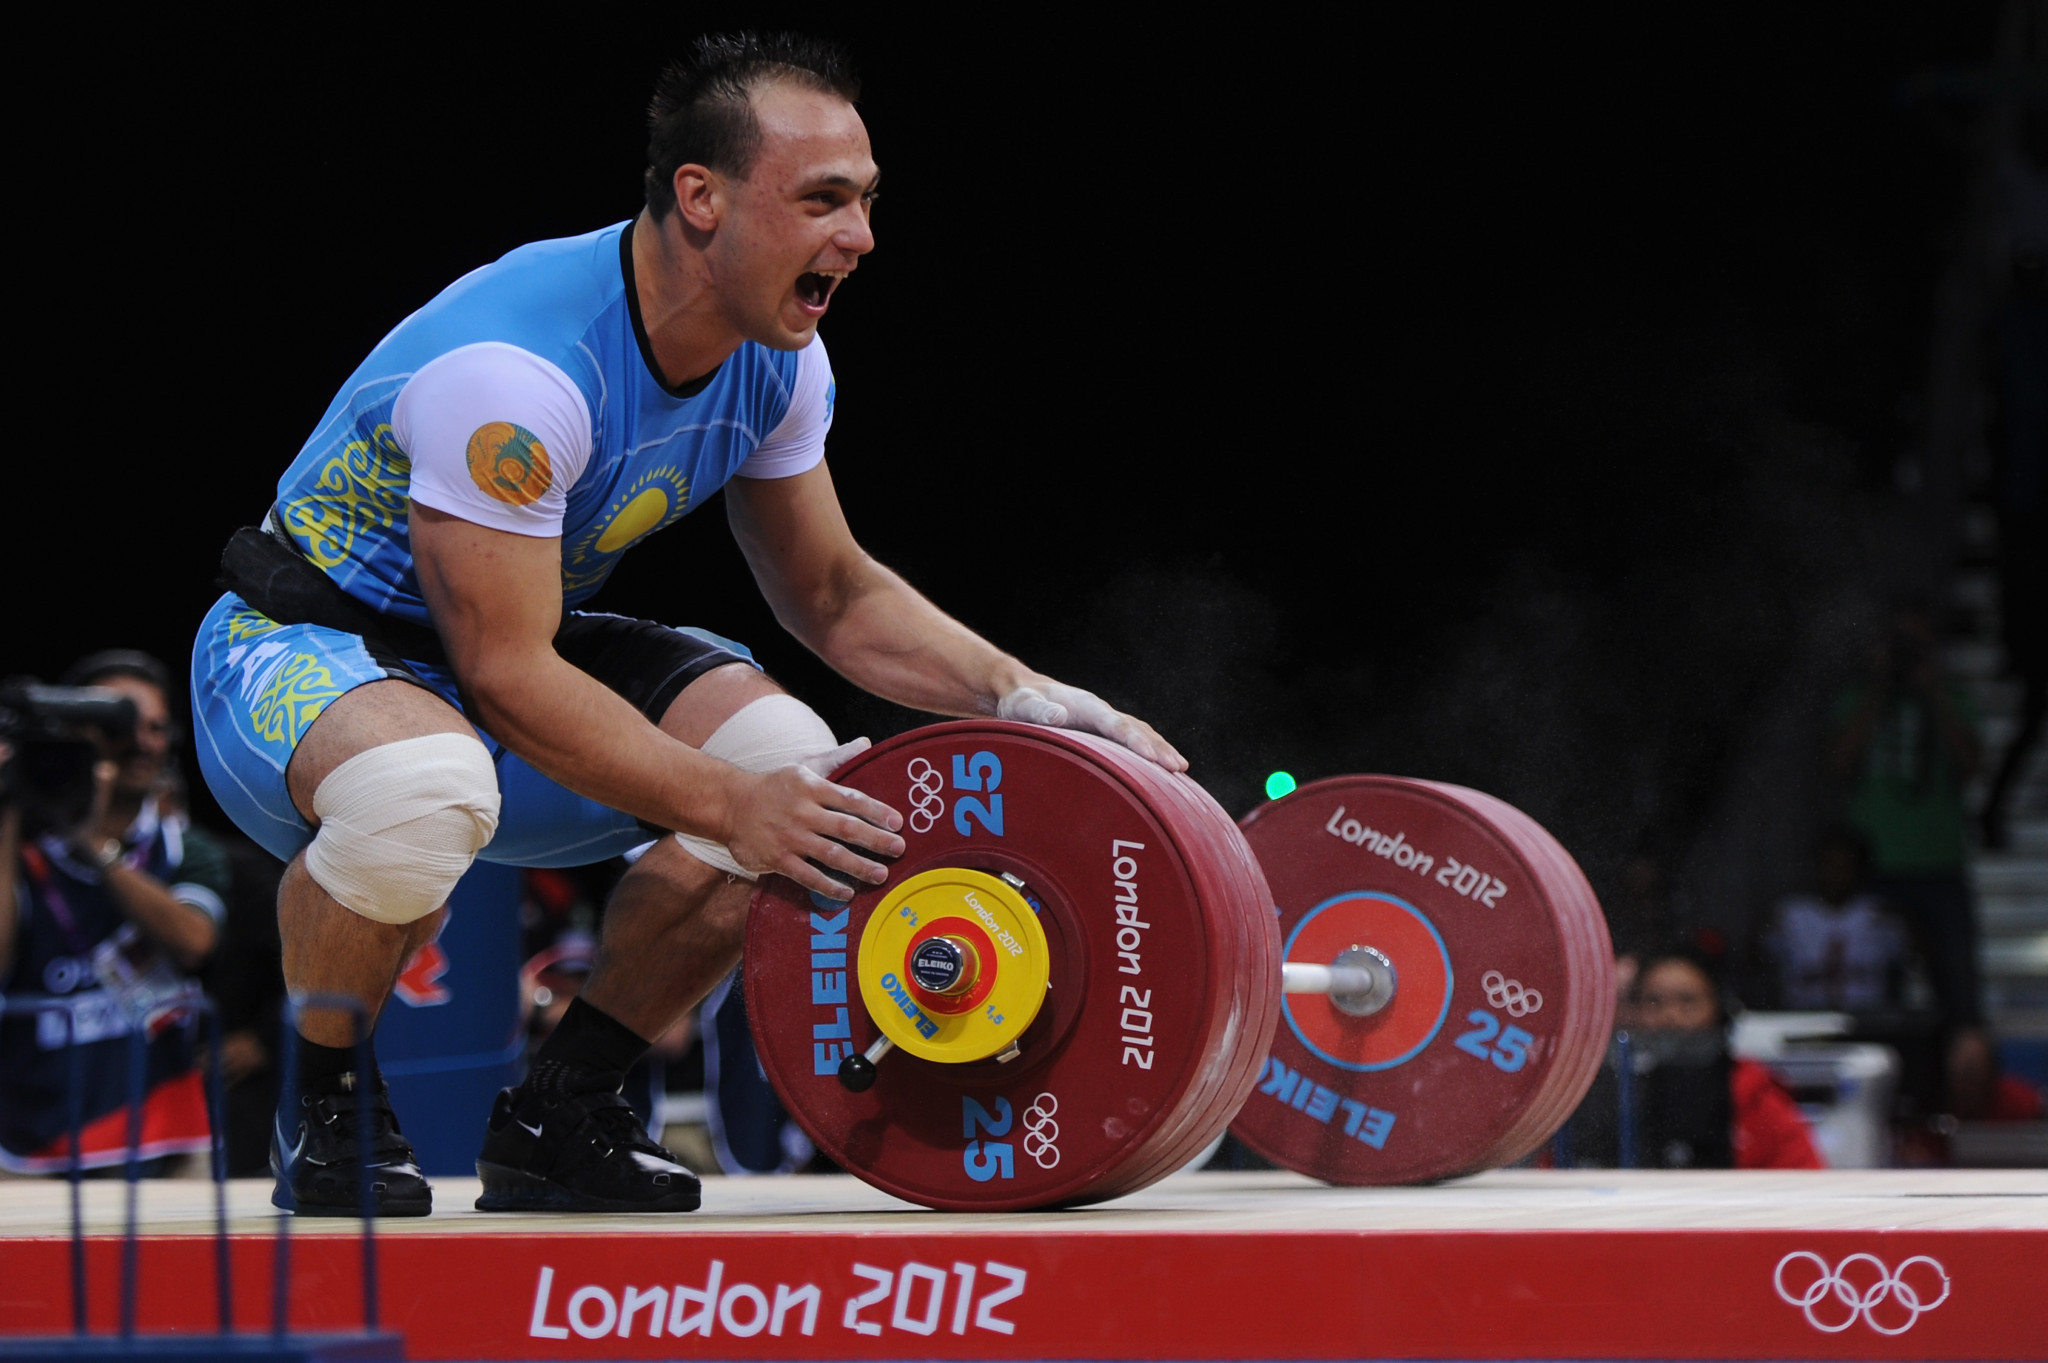 Athletes such as Kazakhstan weightlifter Ilya Ilyin have been stripped of gold medals from Beijing 2008 and London 2012 following re-analysis using new methods enabling longer steroid detection ©Getty Images